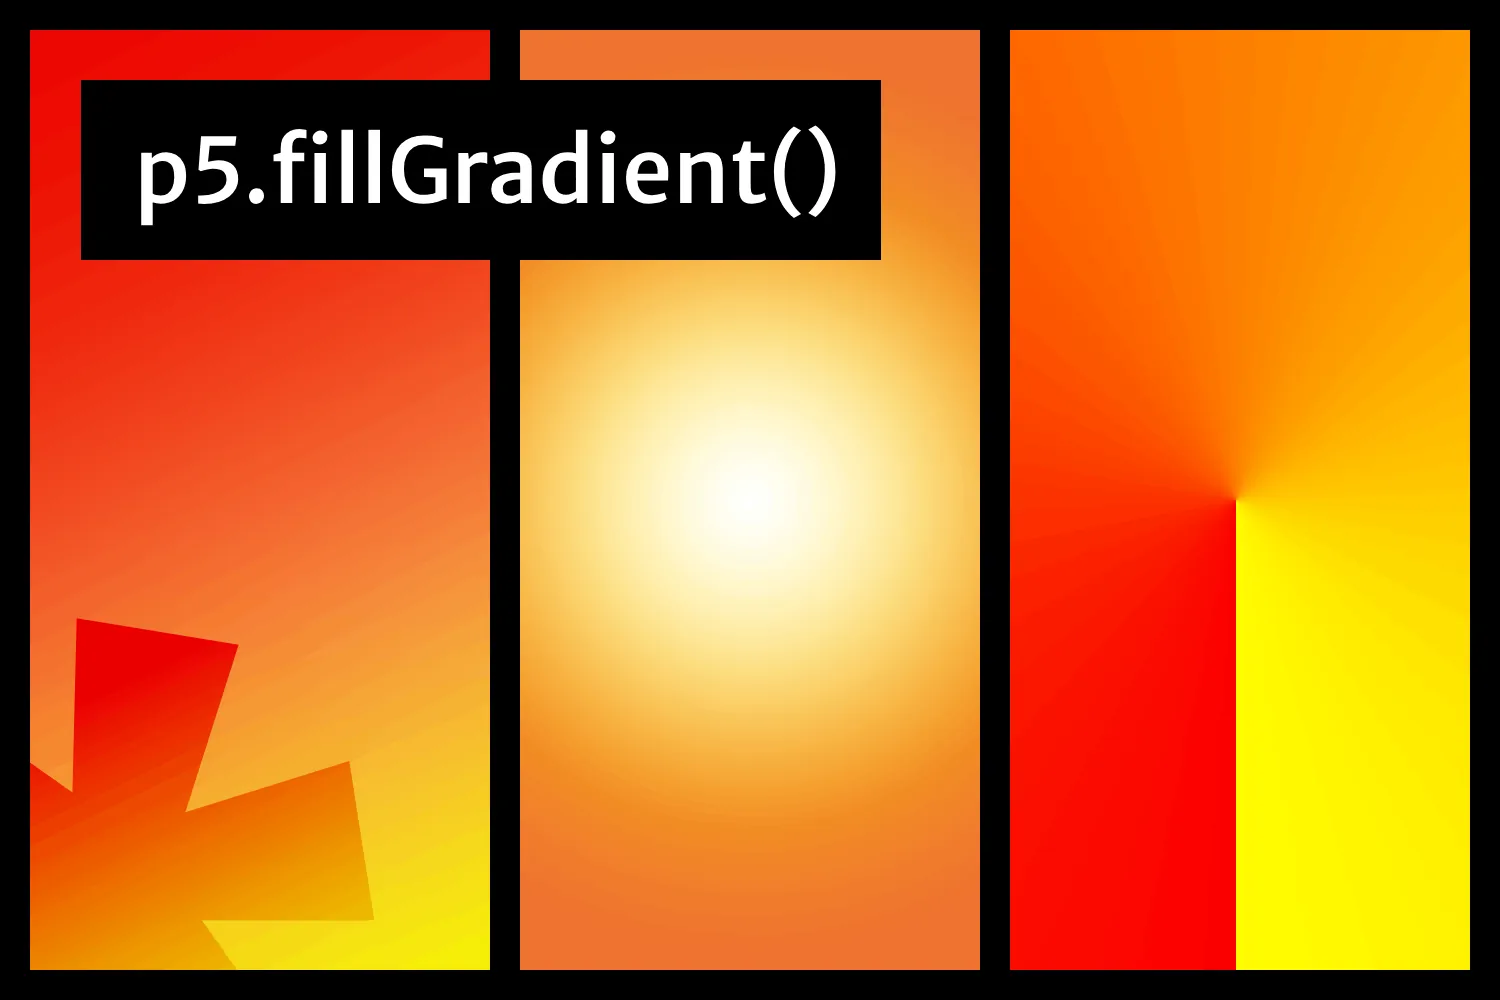 Three gradients (linear, radial, and conic) created using p5.fillGradient